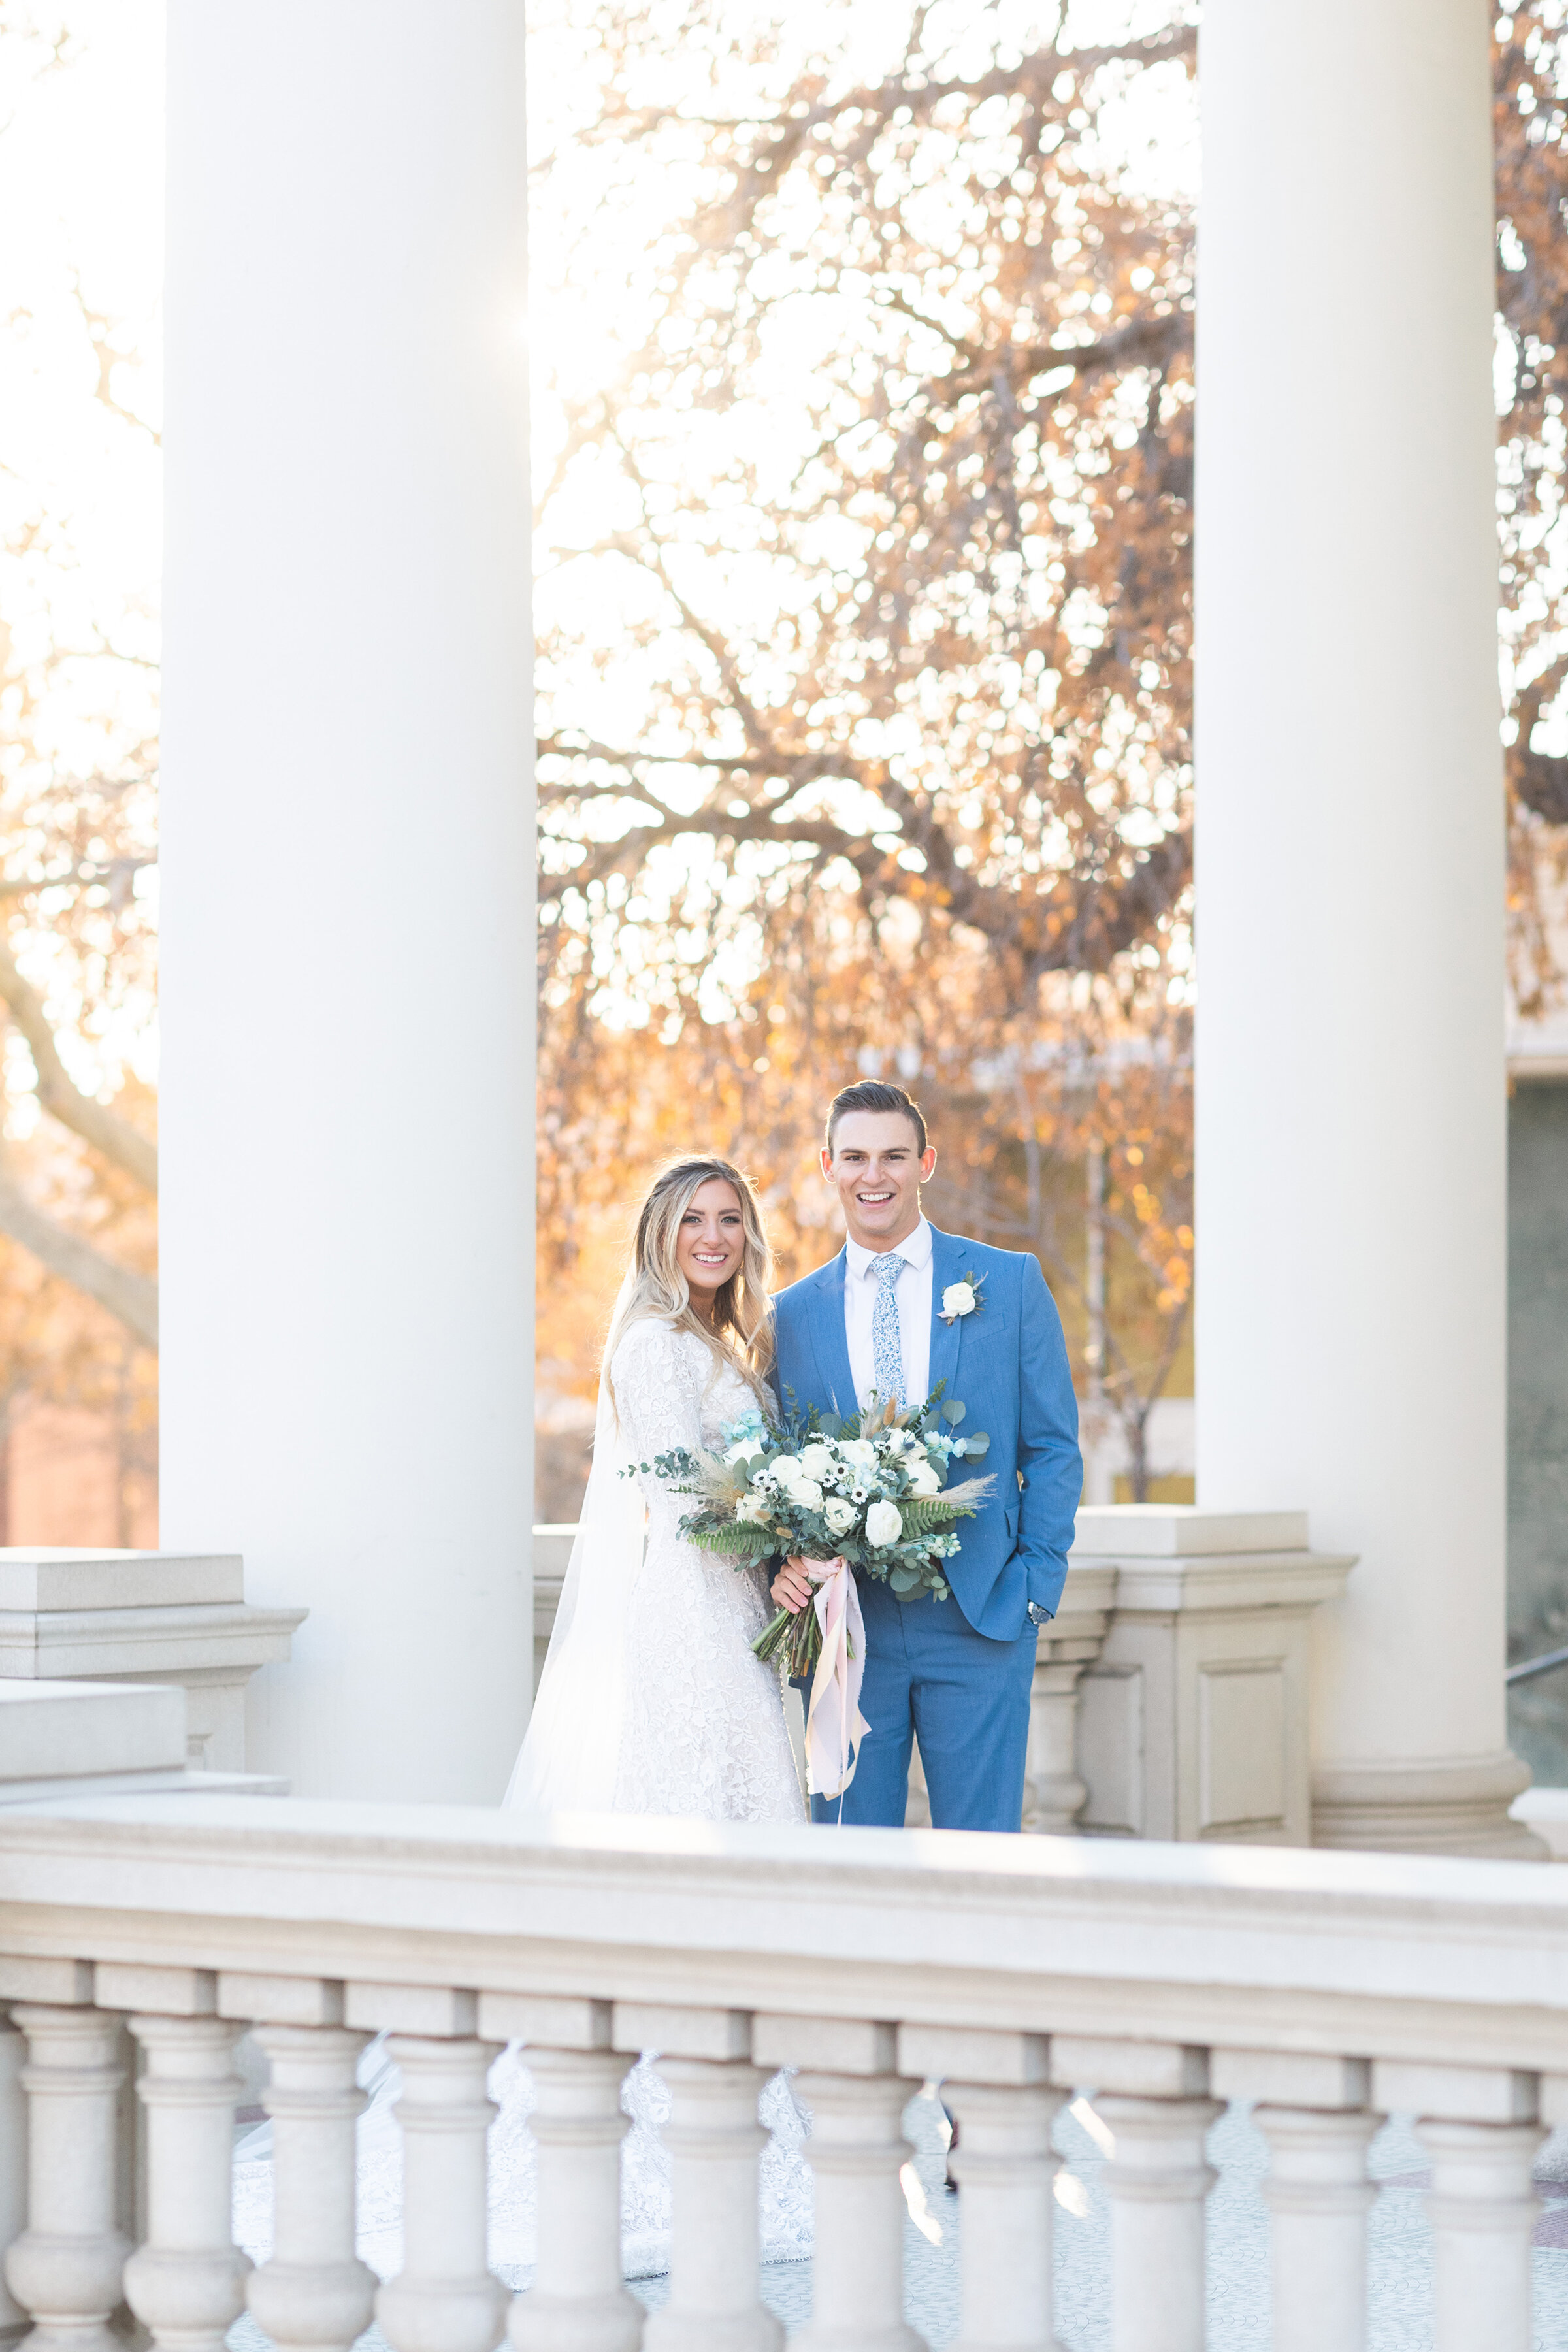  Surrounded by stone pillars and balconies, this bride and groom pose for Clarity Lane Photography outside the Monson Center in Salt Lake City, Utah. salt lake city utah architecture, urban wedding photos, professional salt lake county wedding photog